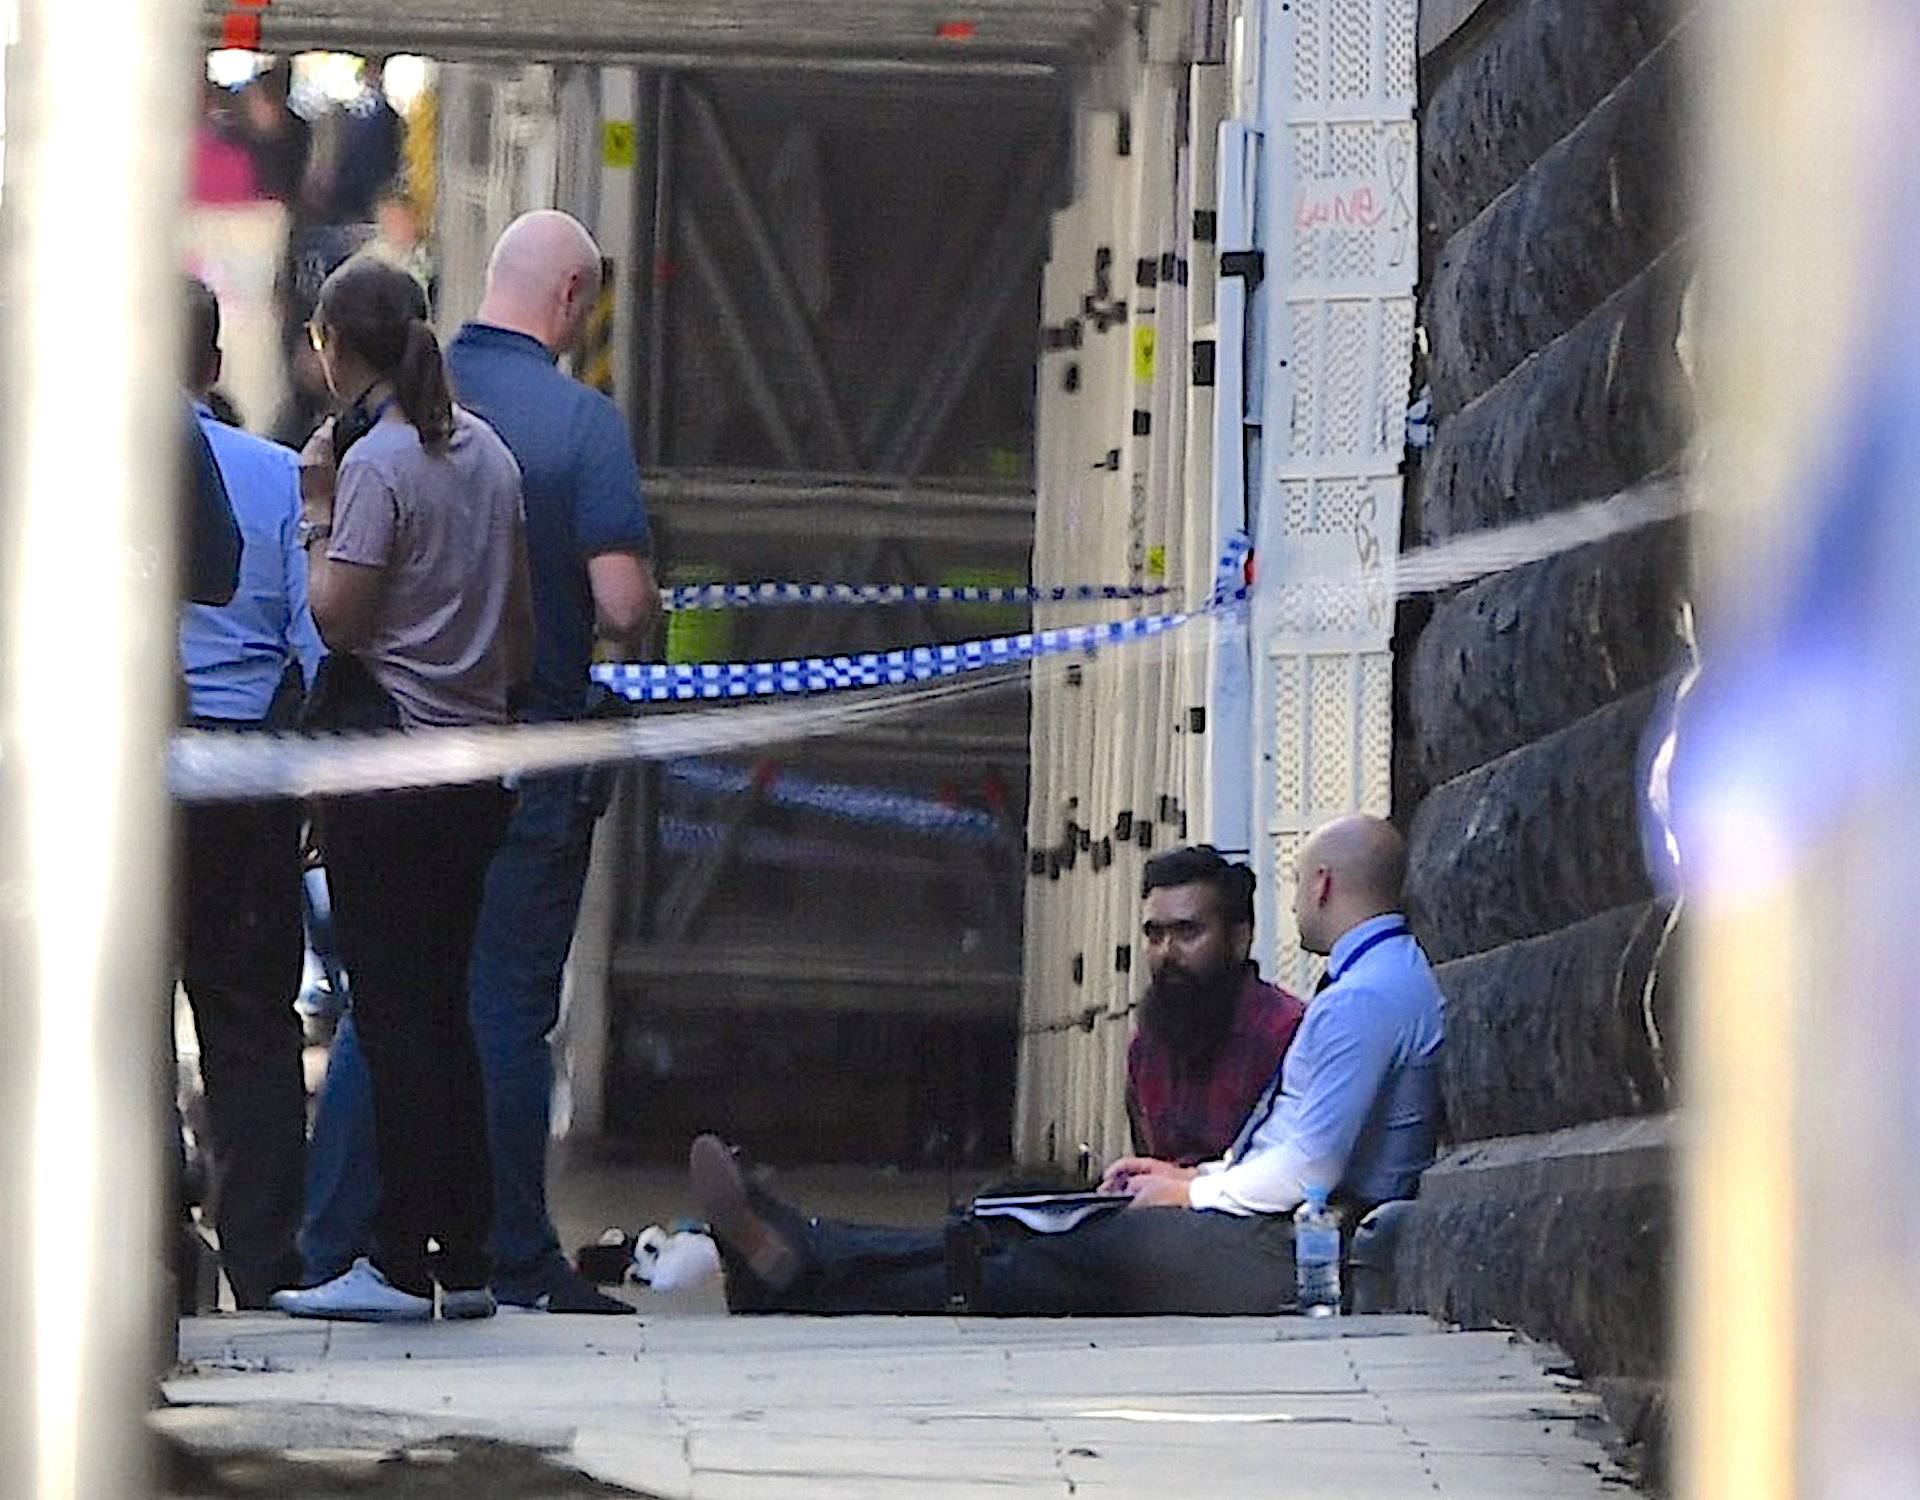 Man sits at the scene of an incident involving a vehicle ploughing into pedestrians at a crowded intersection near the Flinders Street train station in central Melbourne